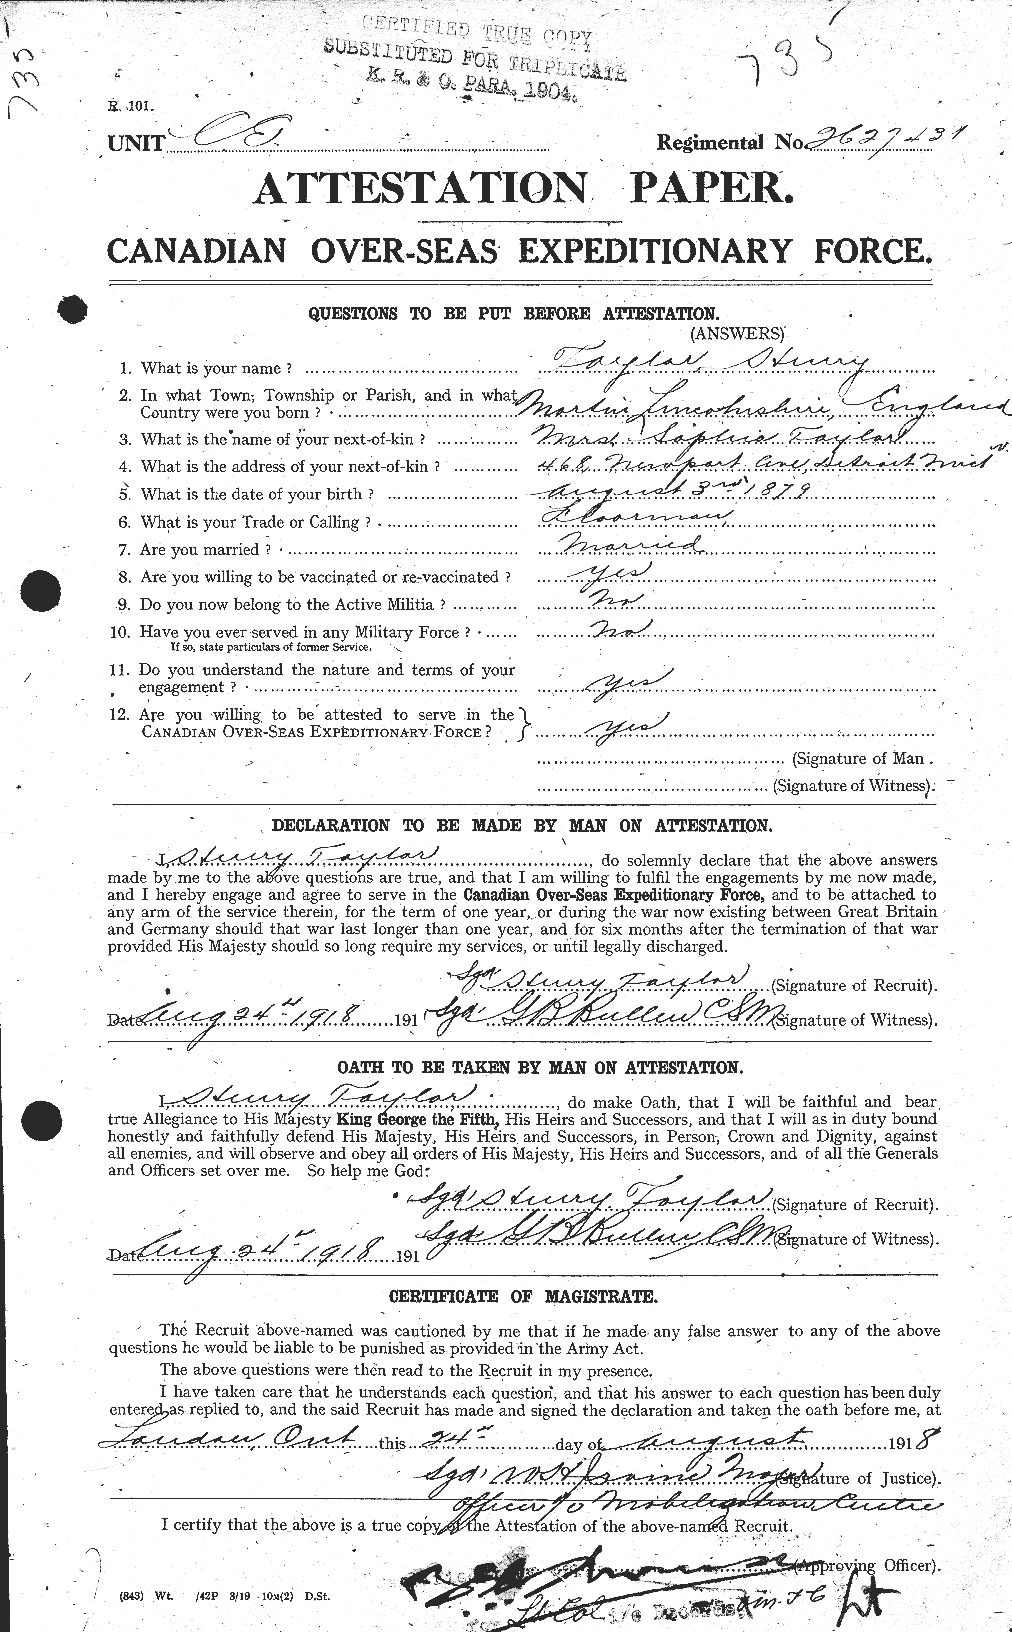 Personnel Records of the First World War - CEF 626524a